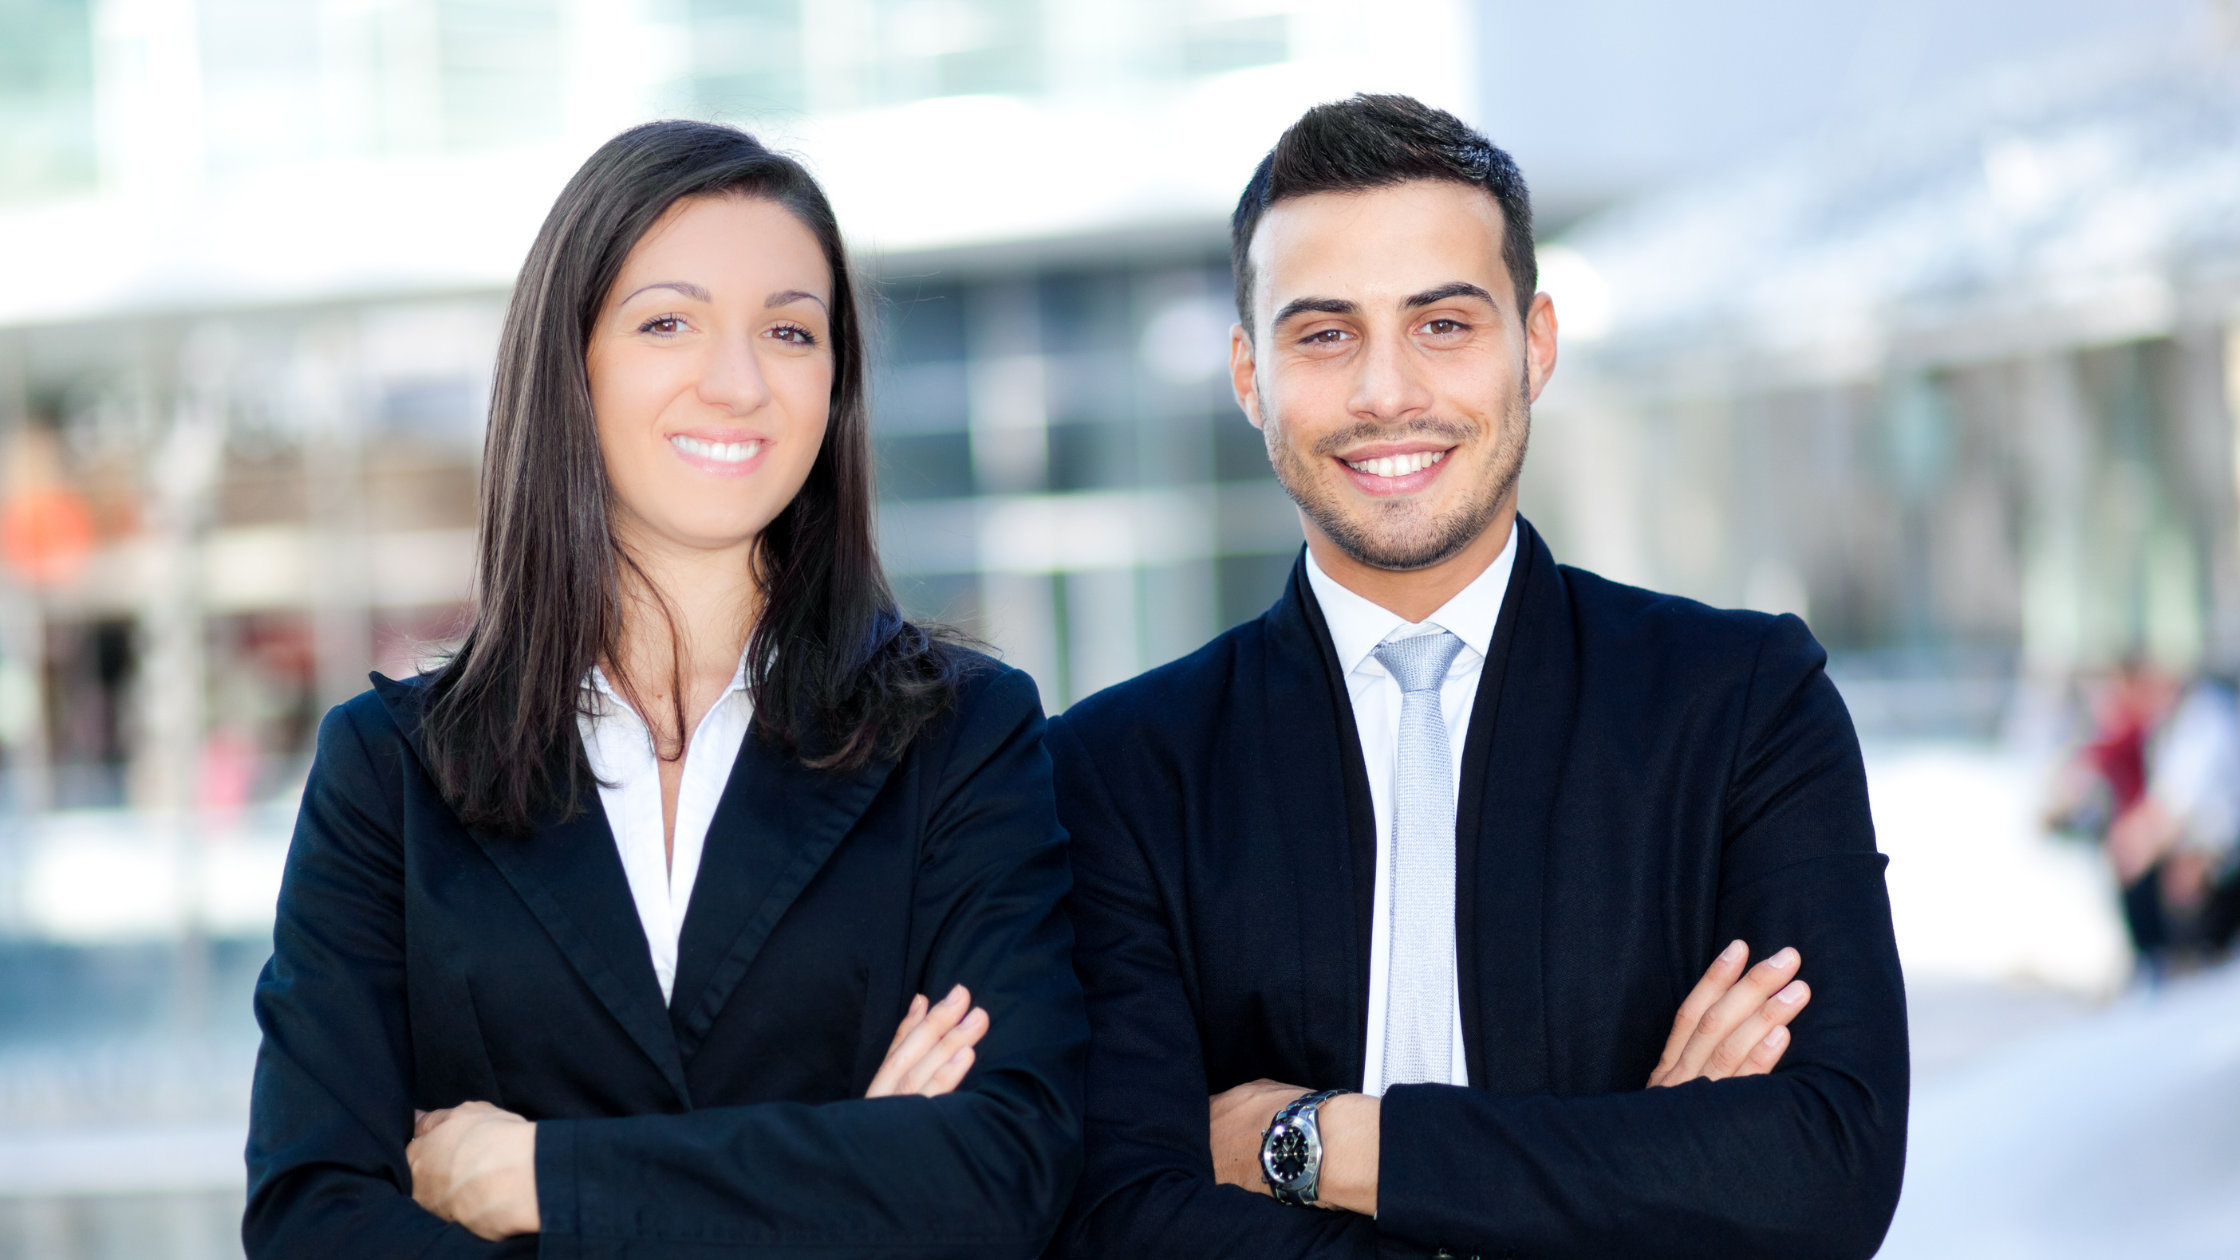 5 Things to Look for in a Business Partner